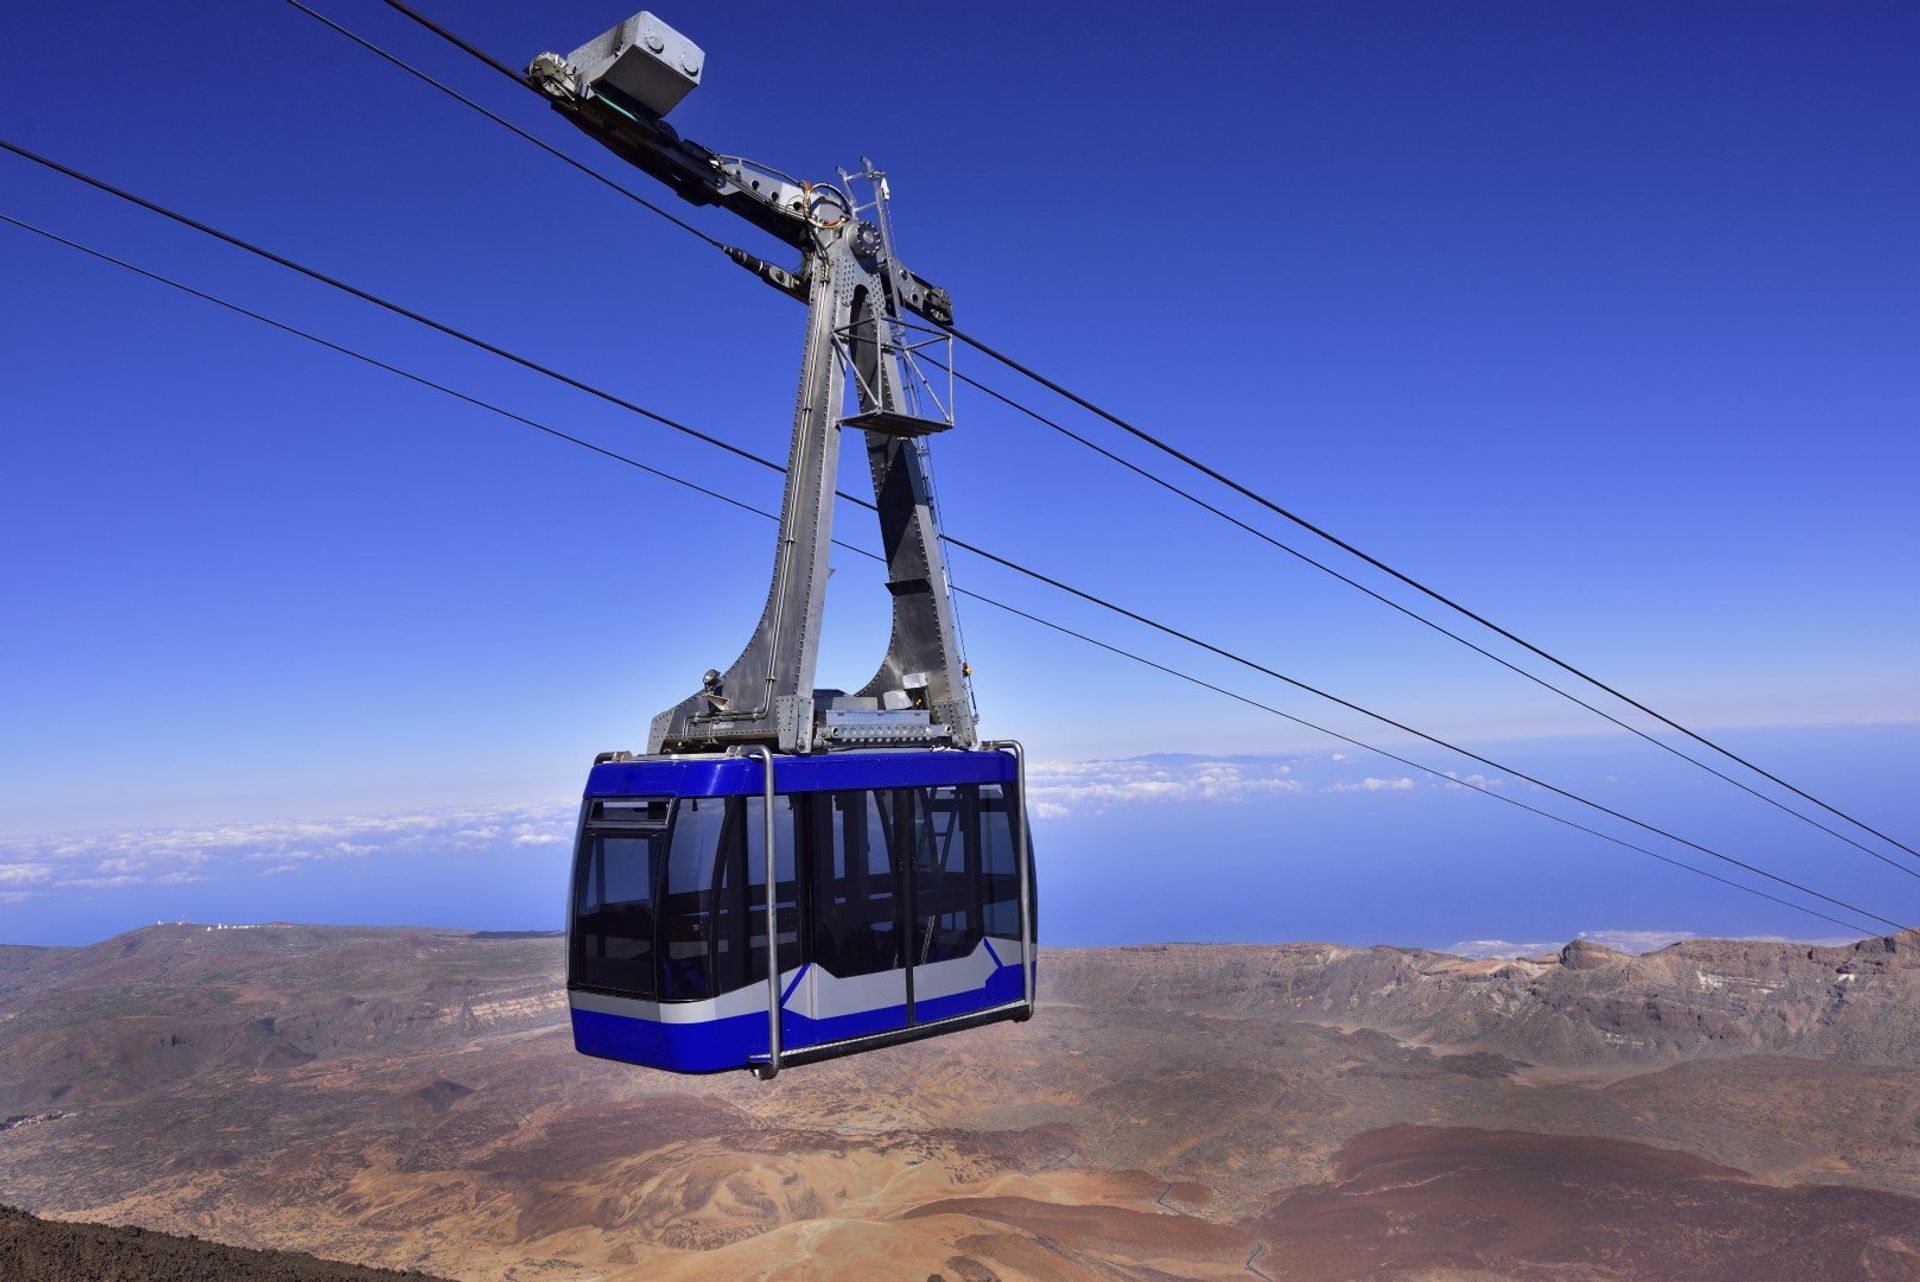 A cable car in the island's centre should take you almost to the highest peak in all of Spain!